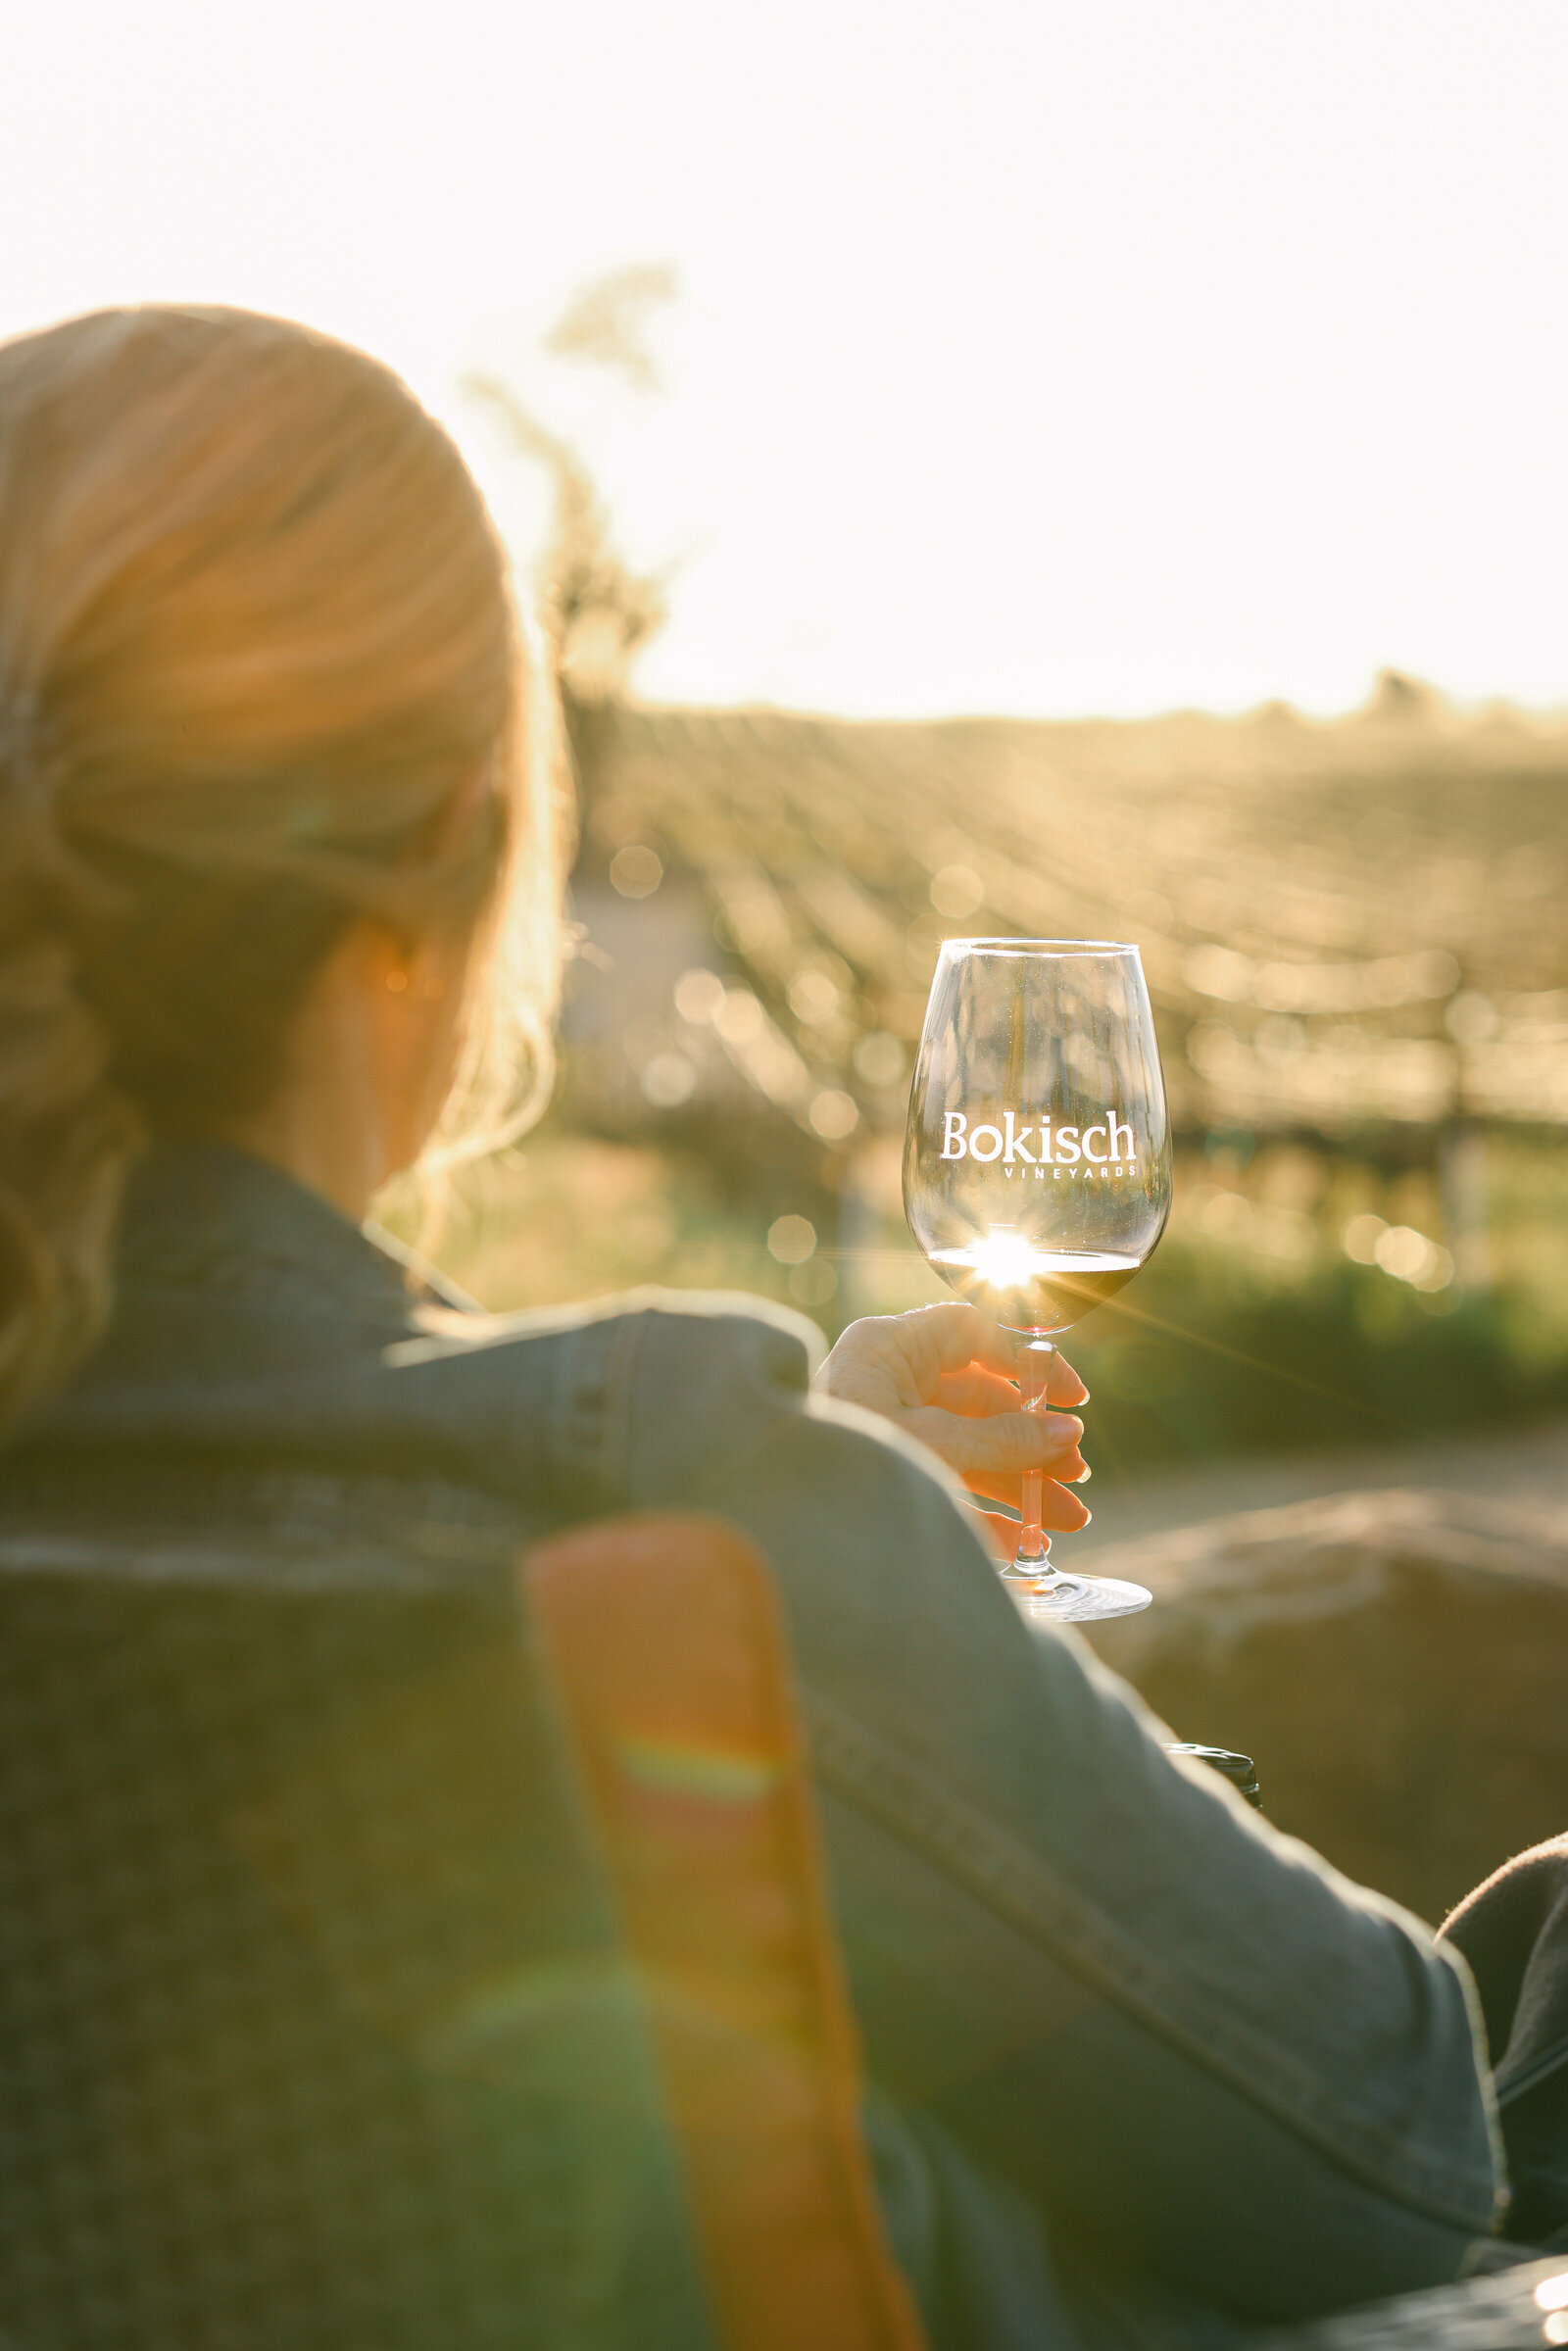 Lodi Tourism brand product photographer Chelsea Loren at Bokisch Vineyards woman with wine glass at sunset